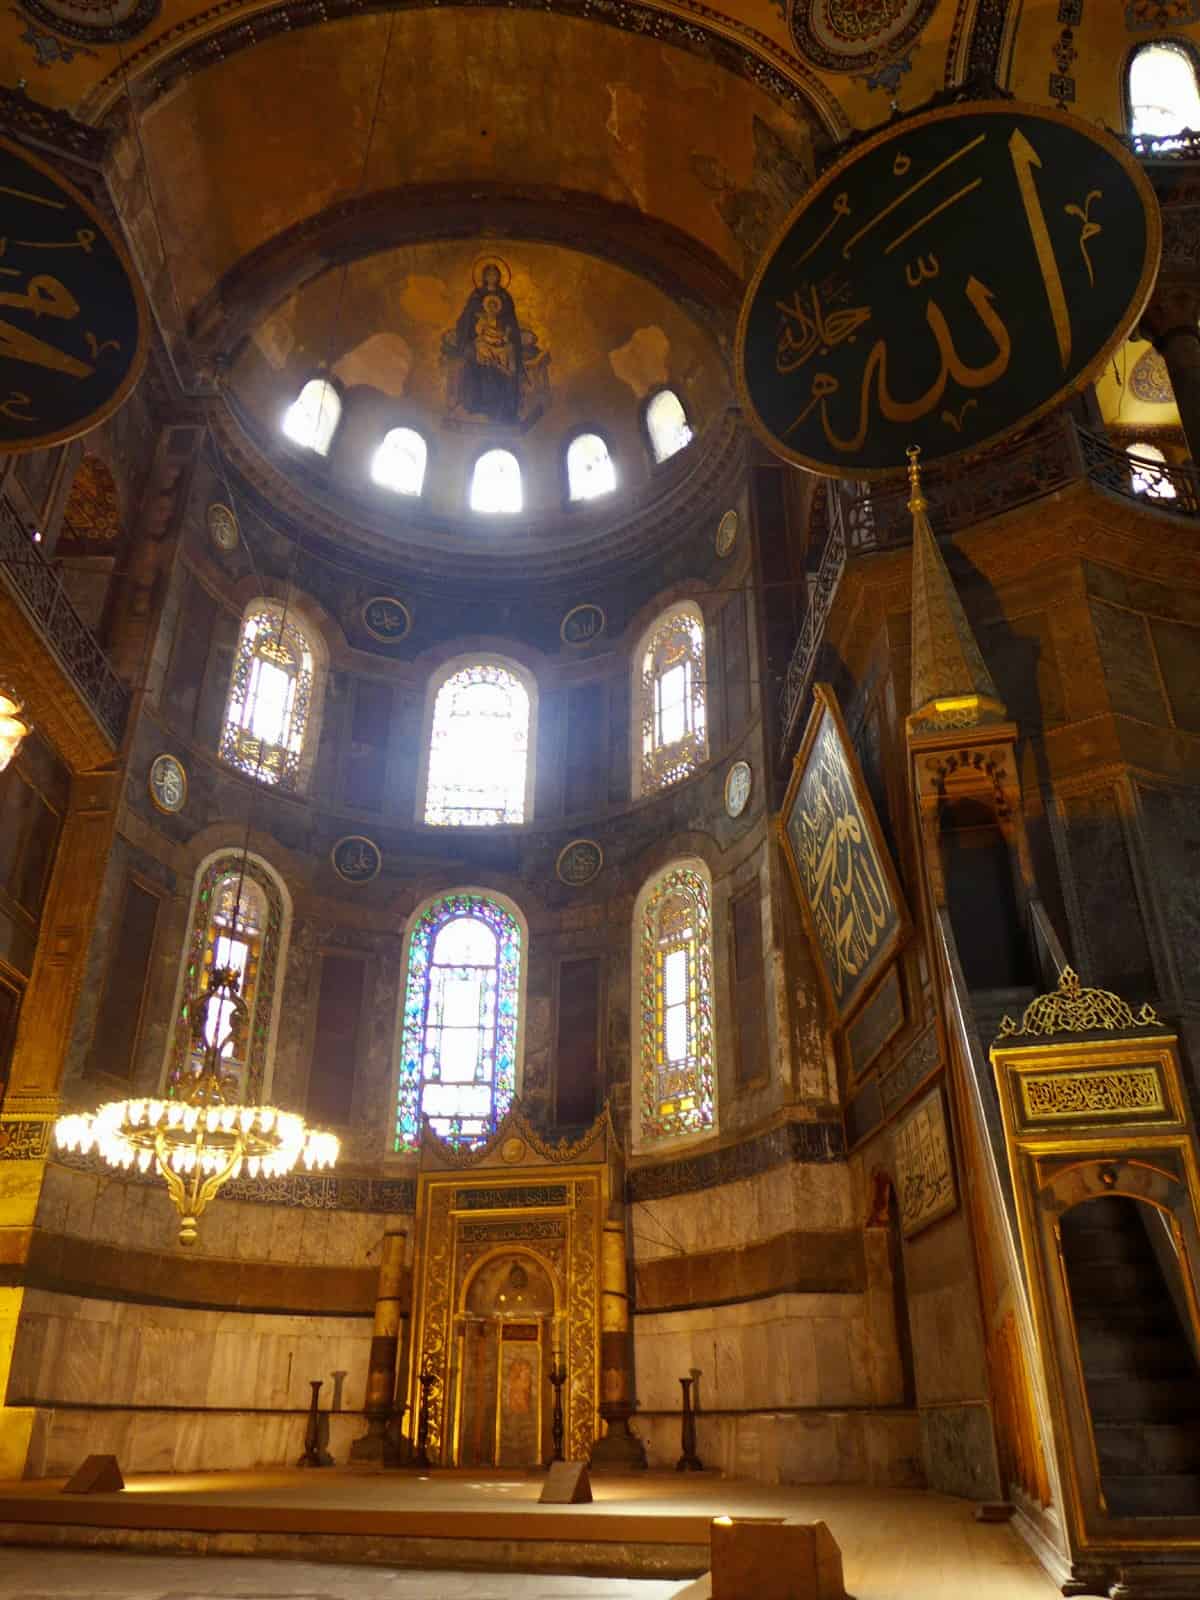 Things to do in Istanbul - Hagia Sophia is one of the most famous historical sites in the world